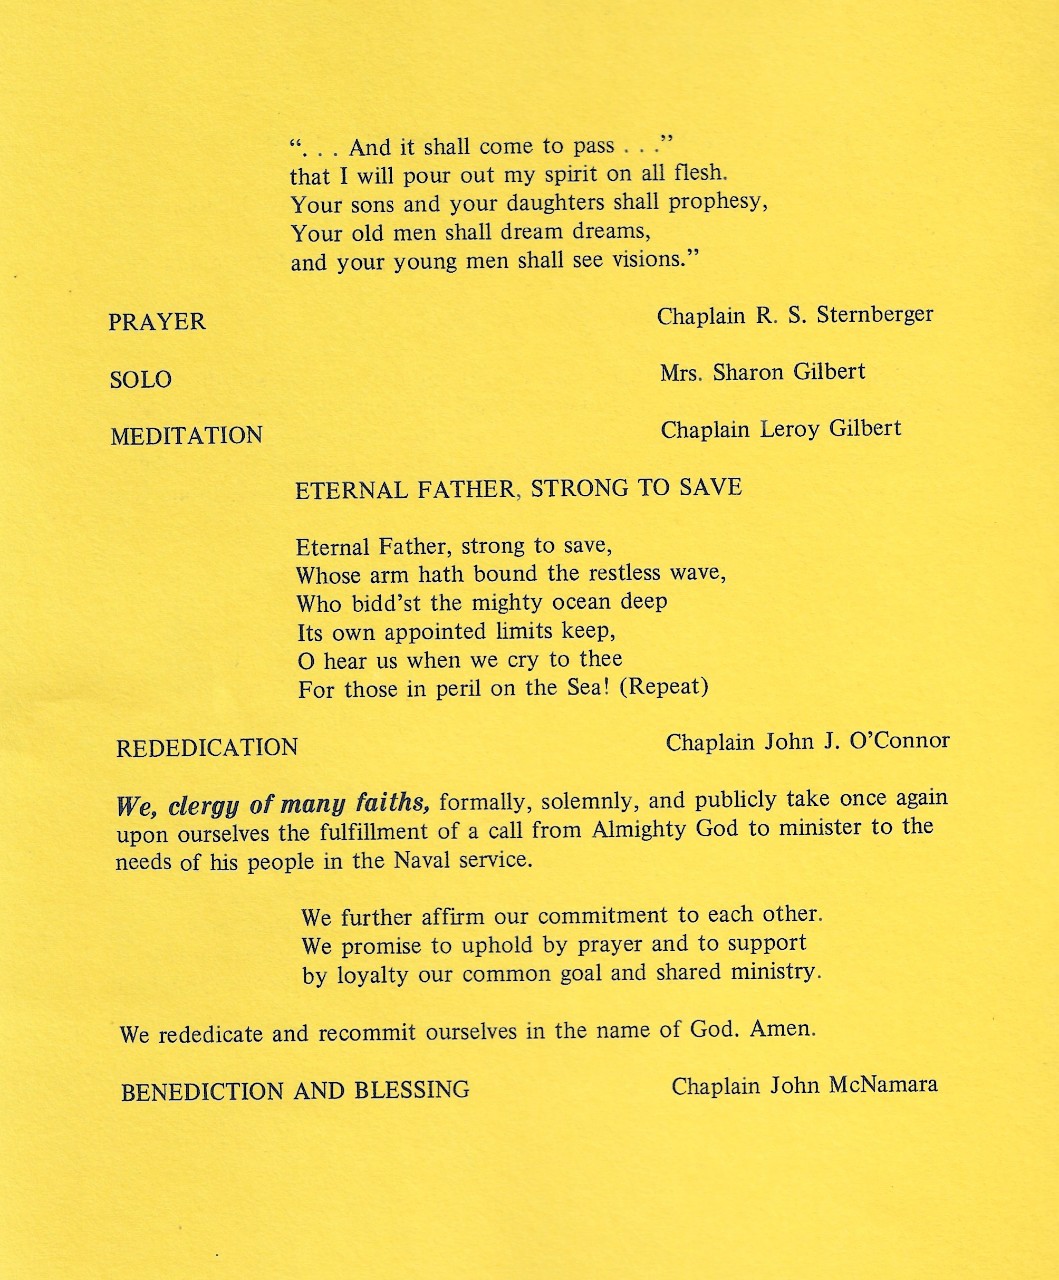 202th Anniversary of the U.S. Navy Chaplain Corps Pamphlet.   Joint commemoration by the Washington Navy Yard Chapel and the Navy Memorial Museum, November 16, 1977.  